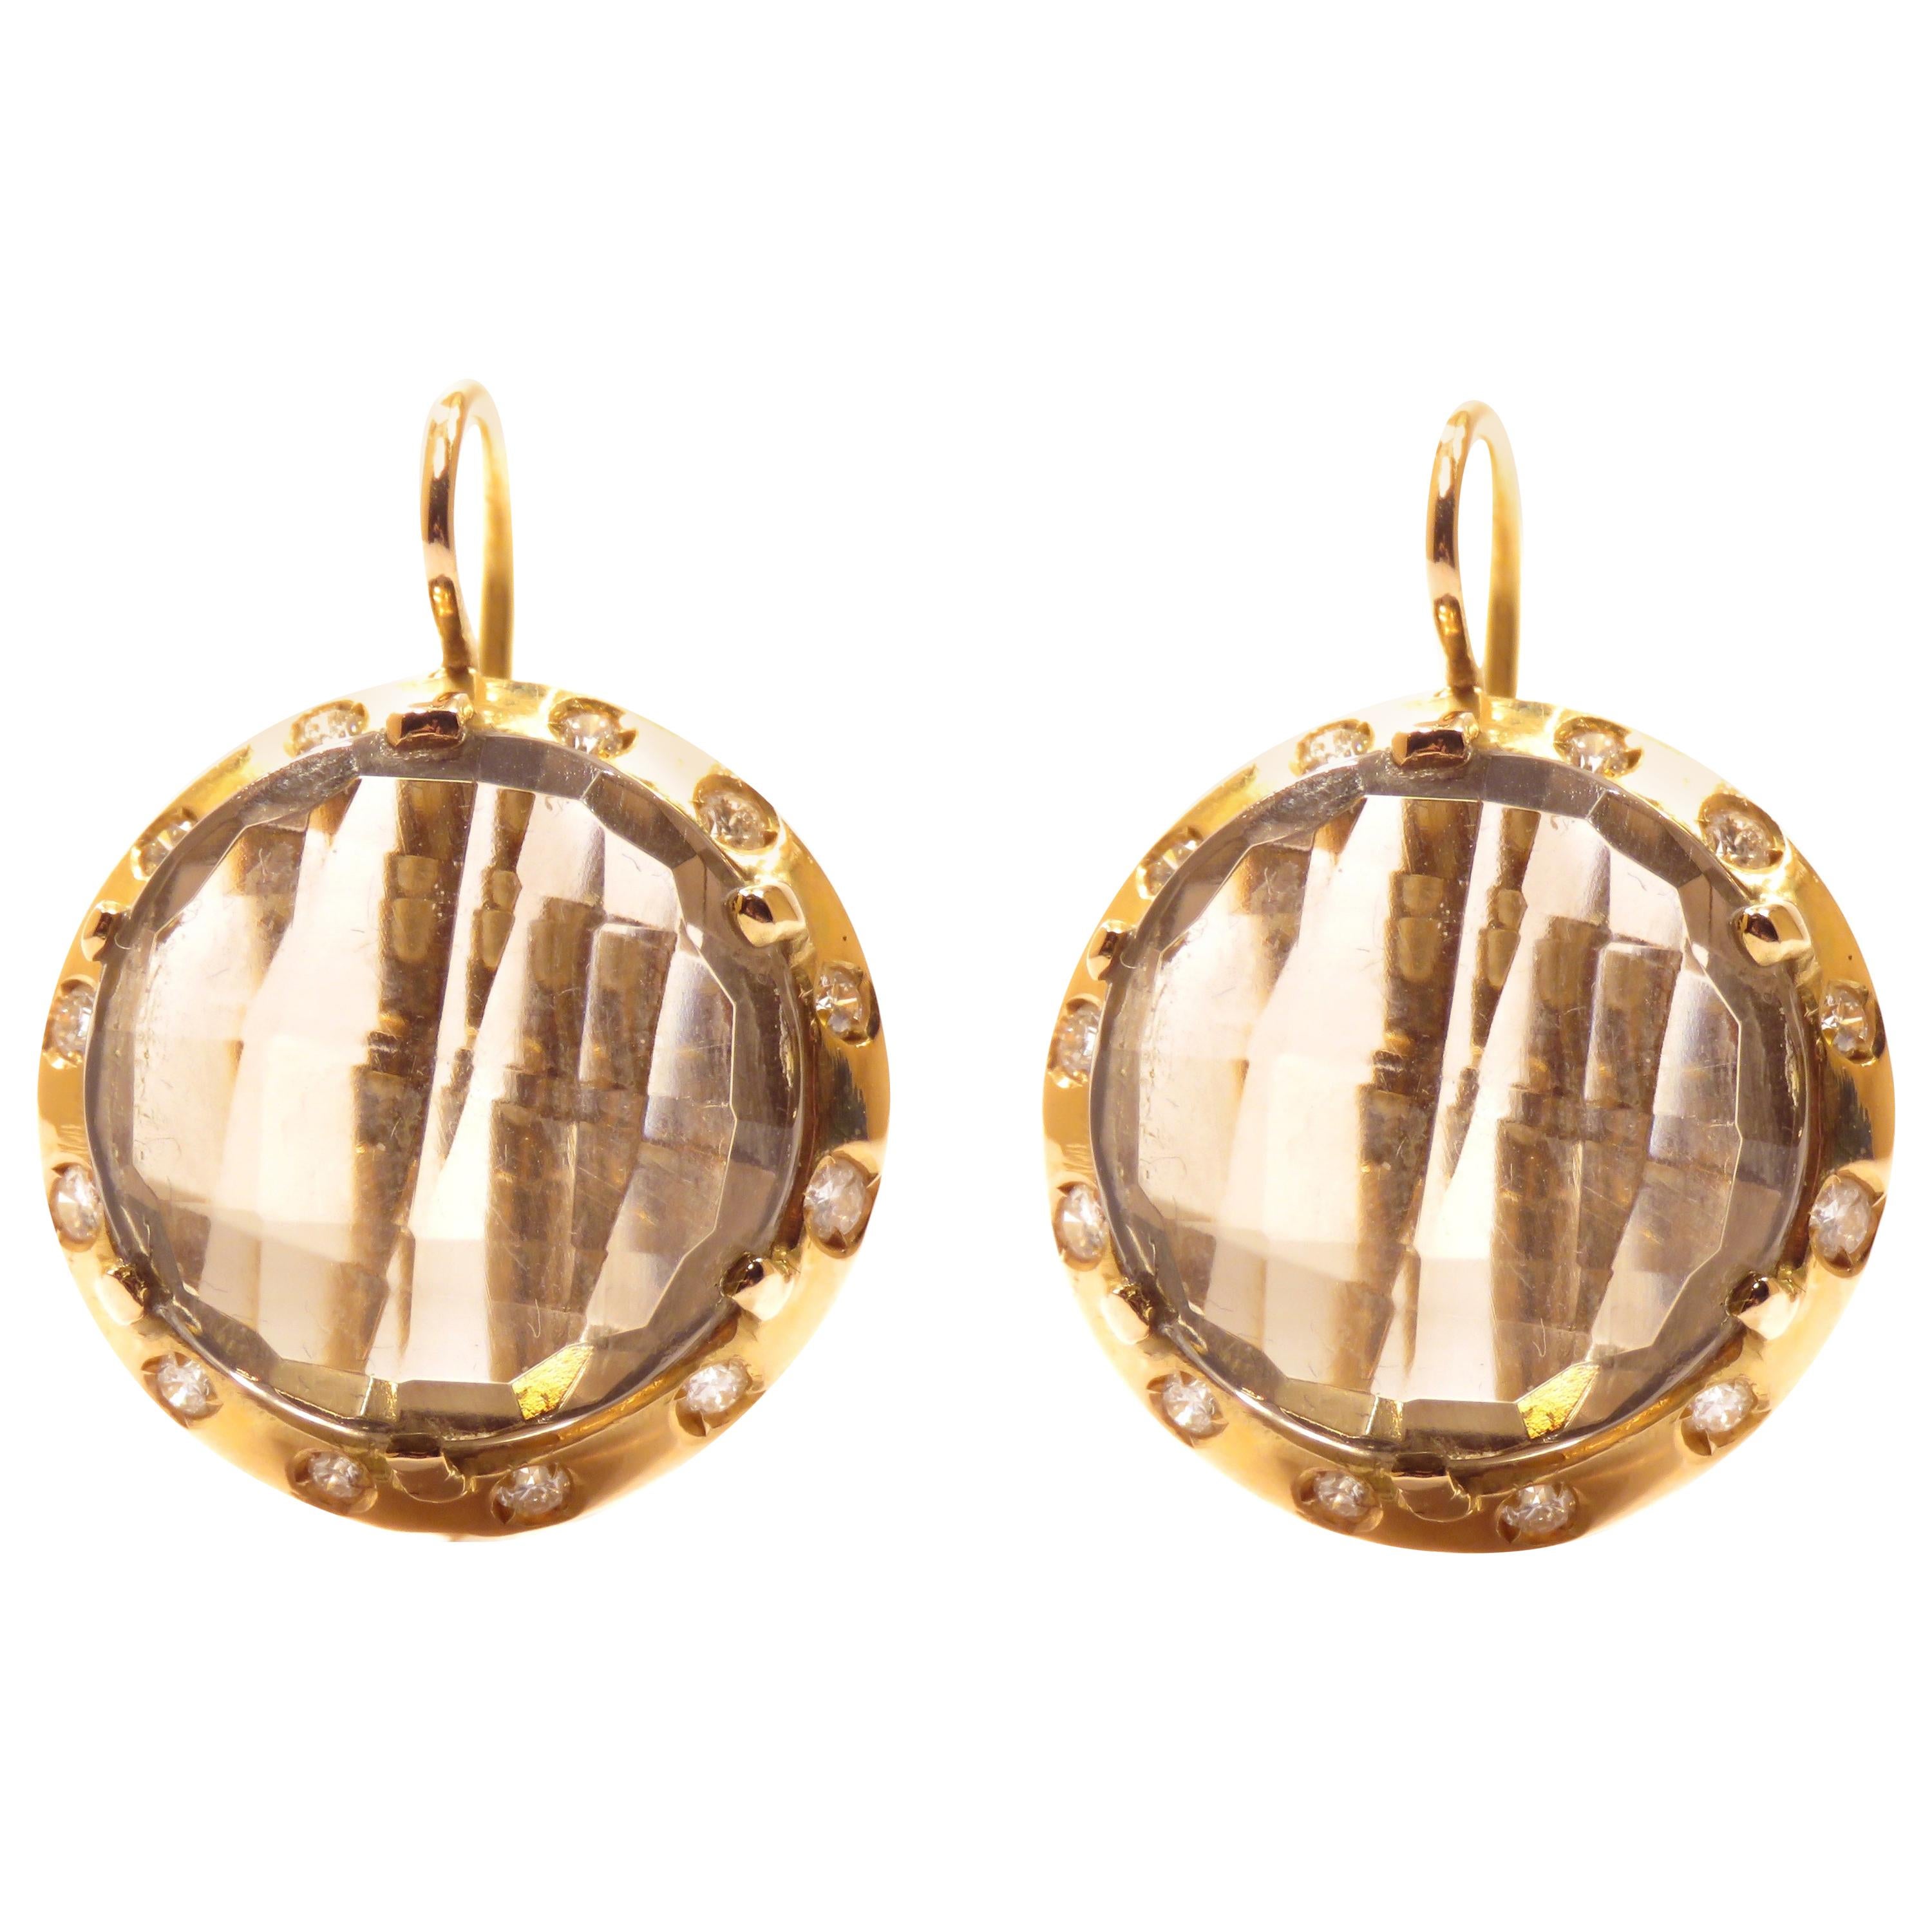 Grey Topaz Diamonds Rose Gold Earrings Handcrafted in Italy